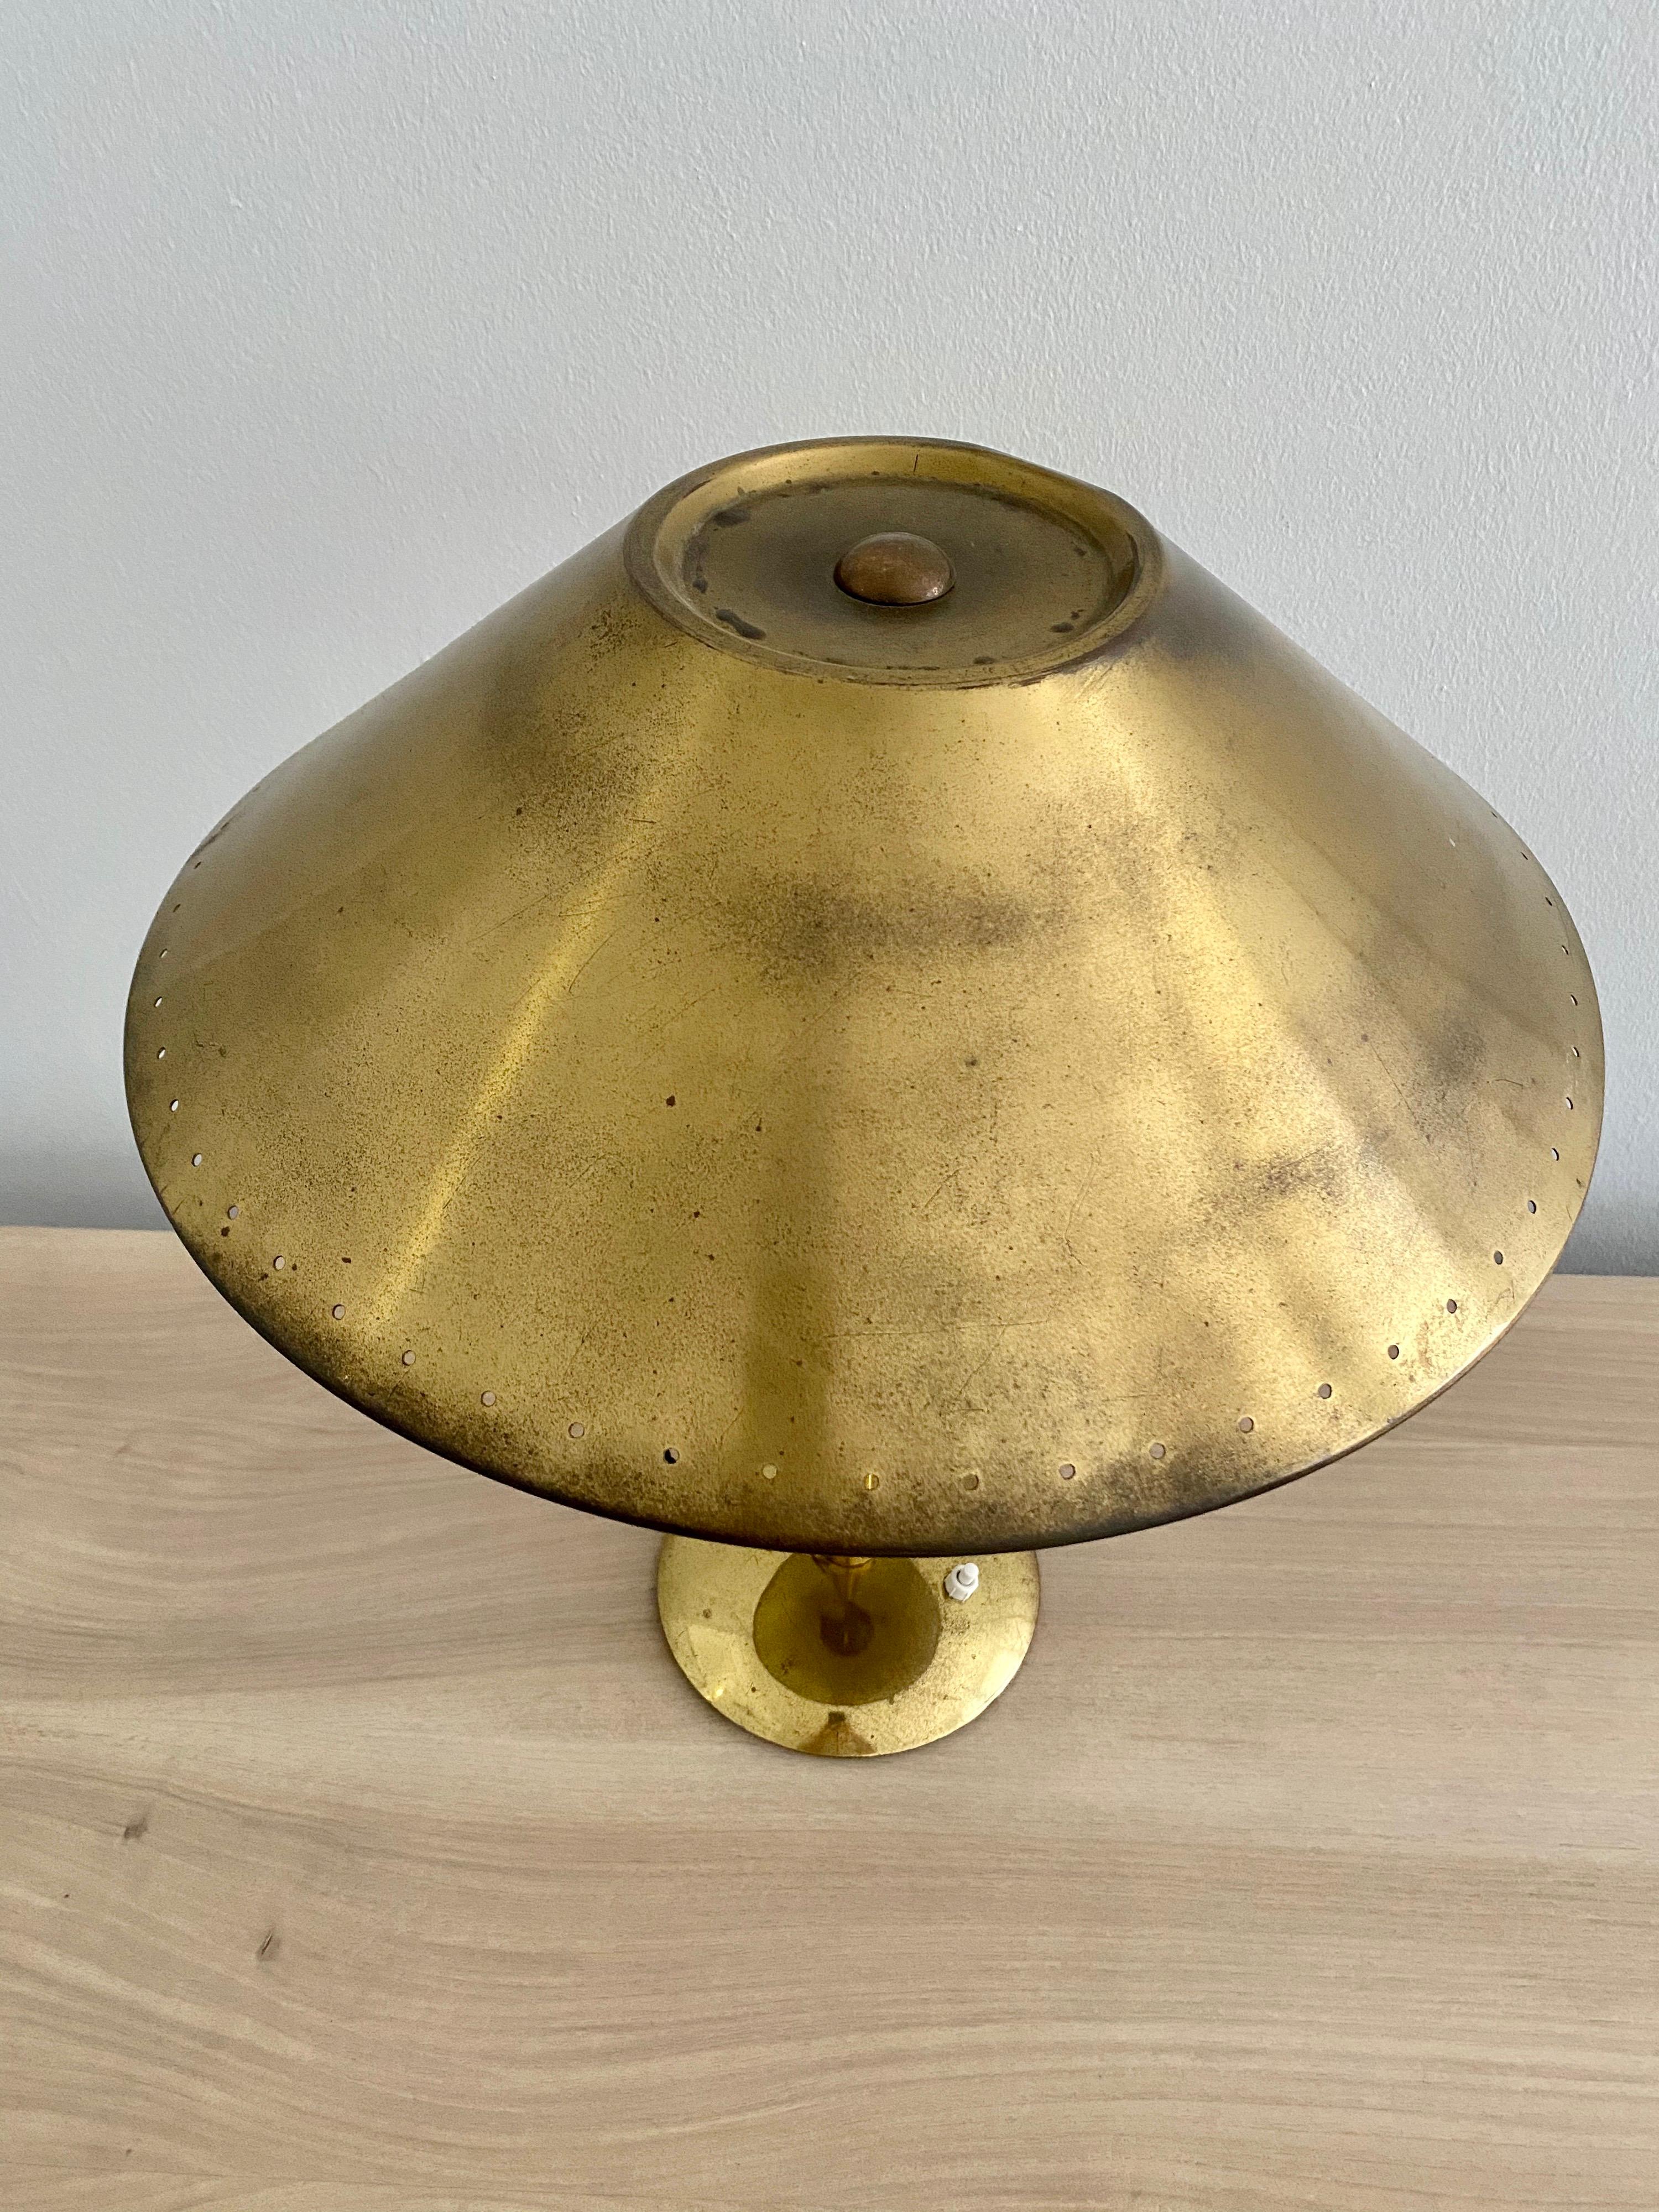 Mid-Century Modern brass table lamp

Rewired 

Measures: Height 18